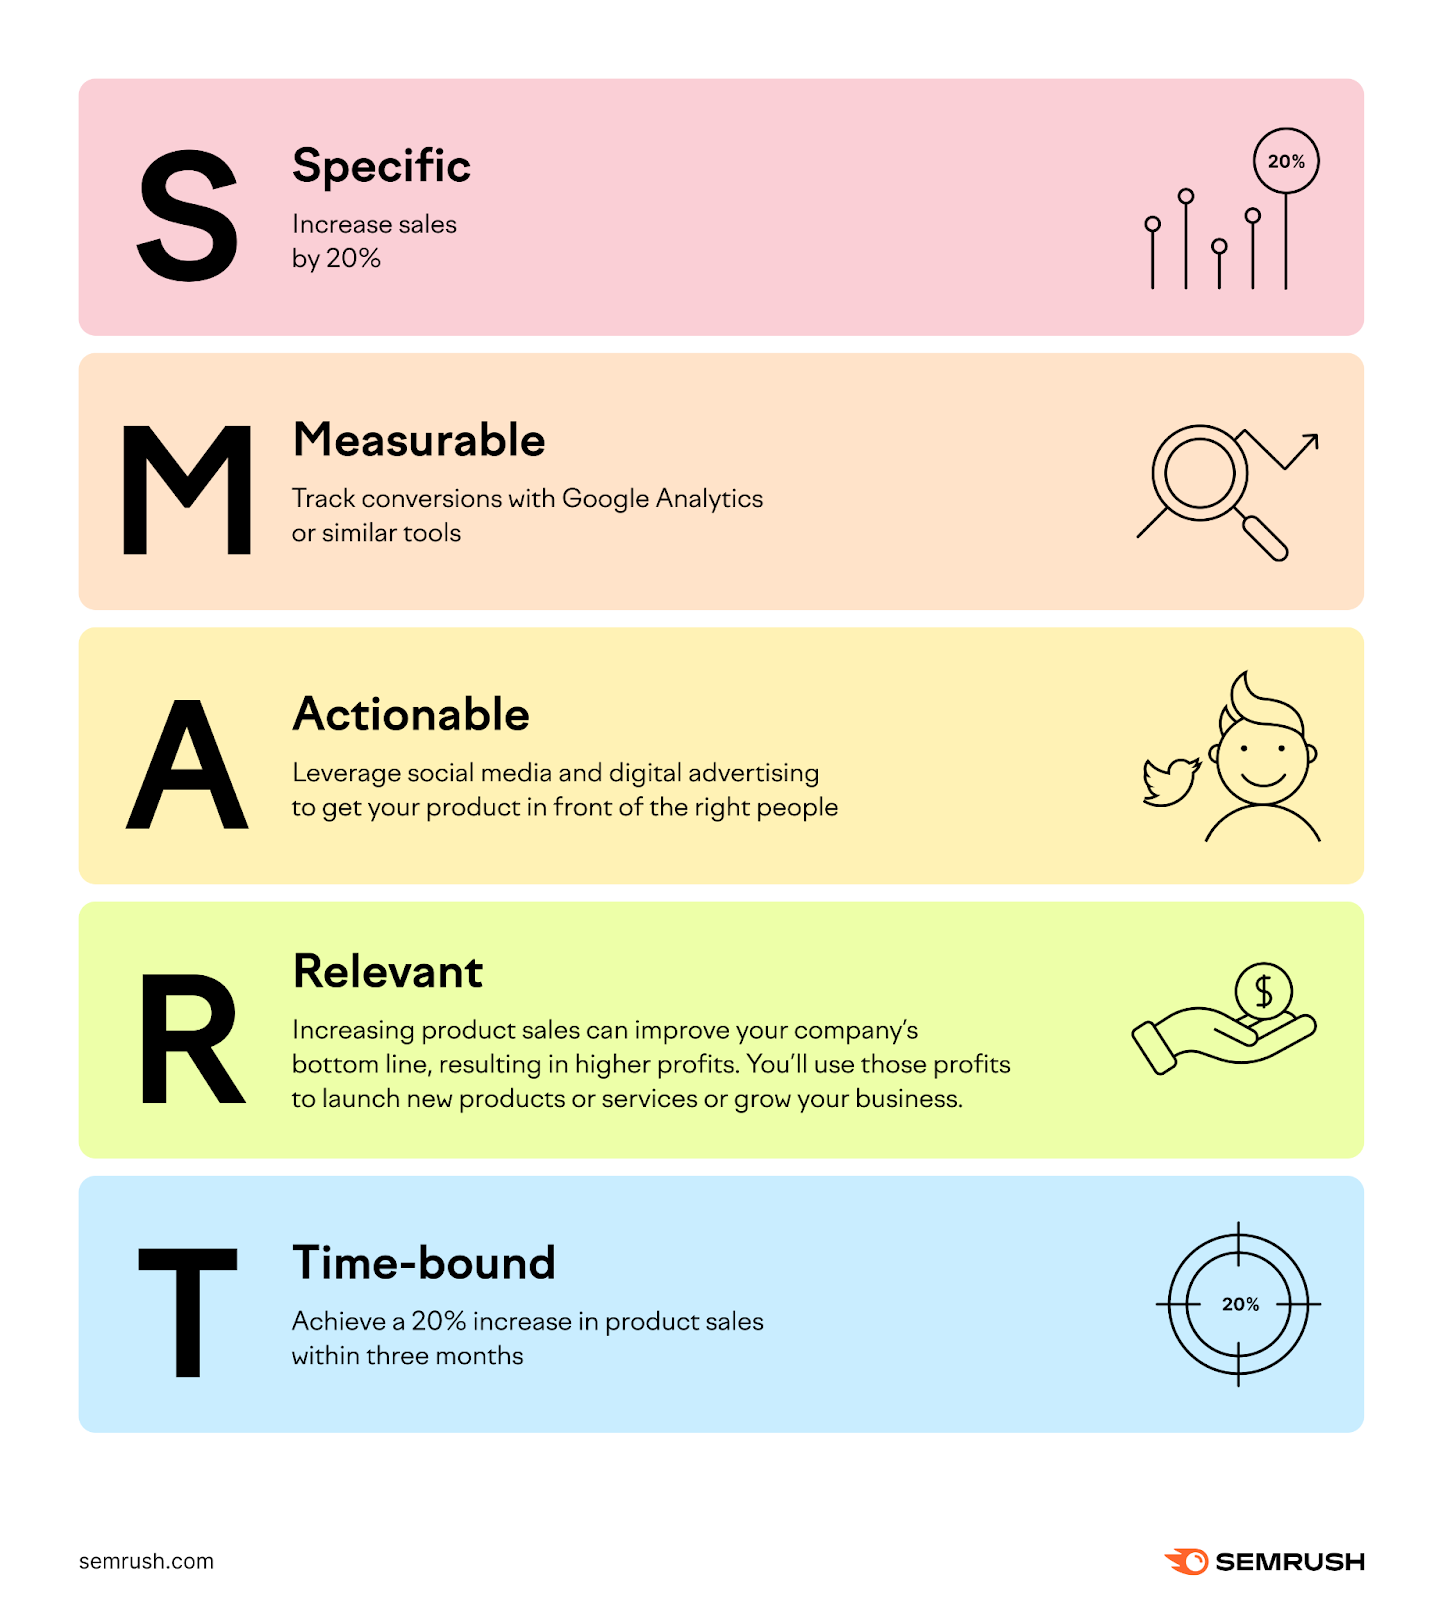 SMART (Specific, Measurable, Actionable, Relevant, and Timebound) model  overview